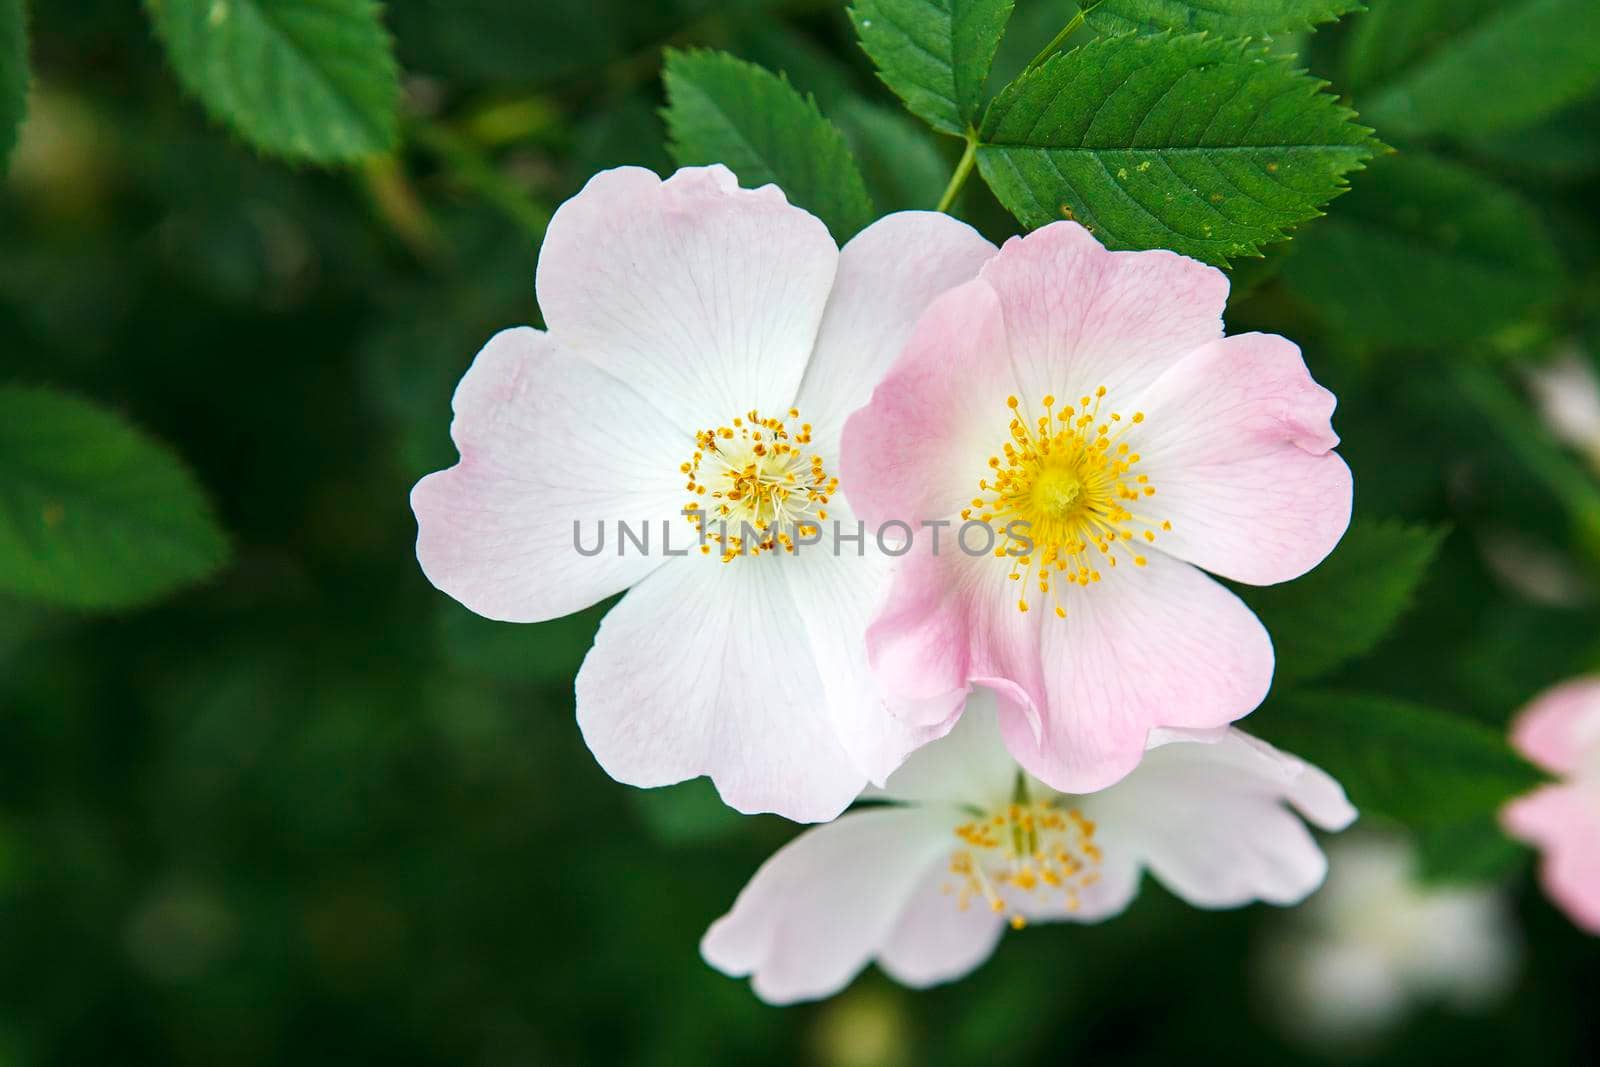 Three pale pink rosehip flowers on a blurred green backdrop